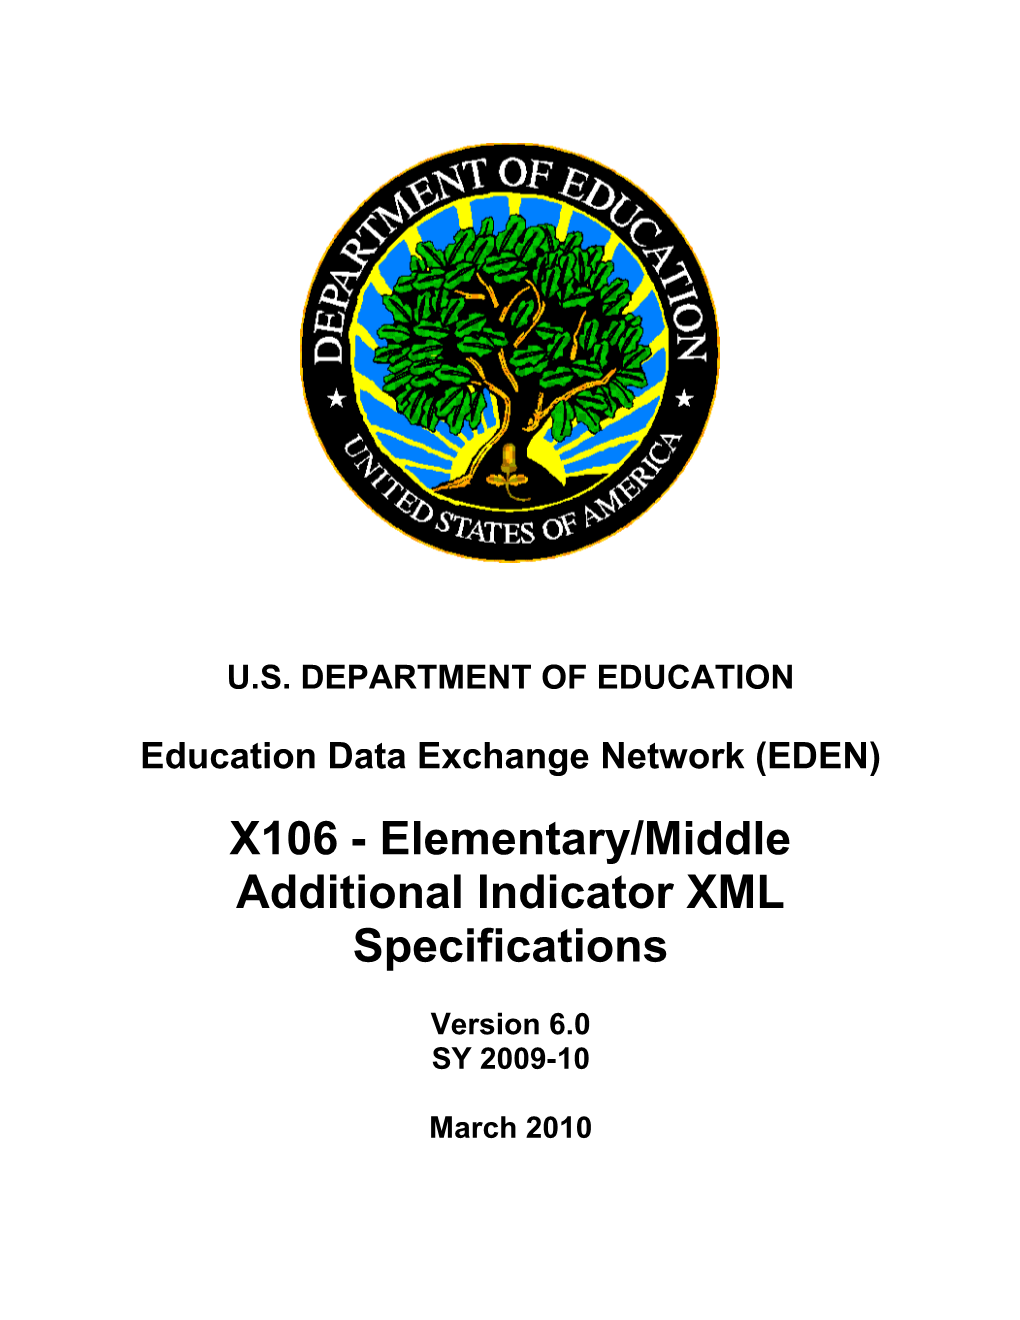 Elementary/Middle Additional Indicator XML Specifications